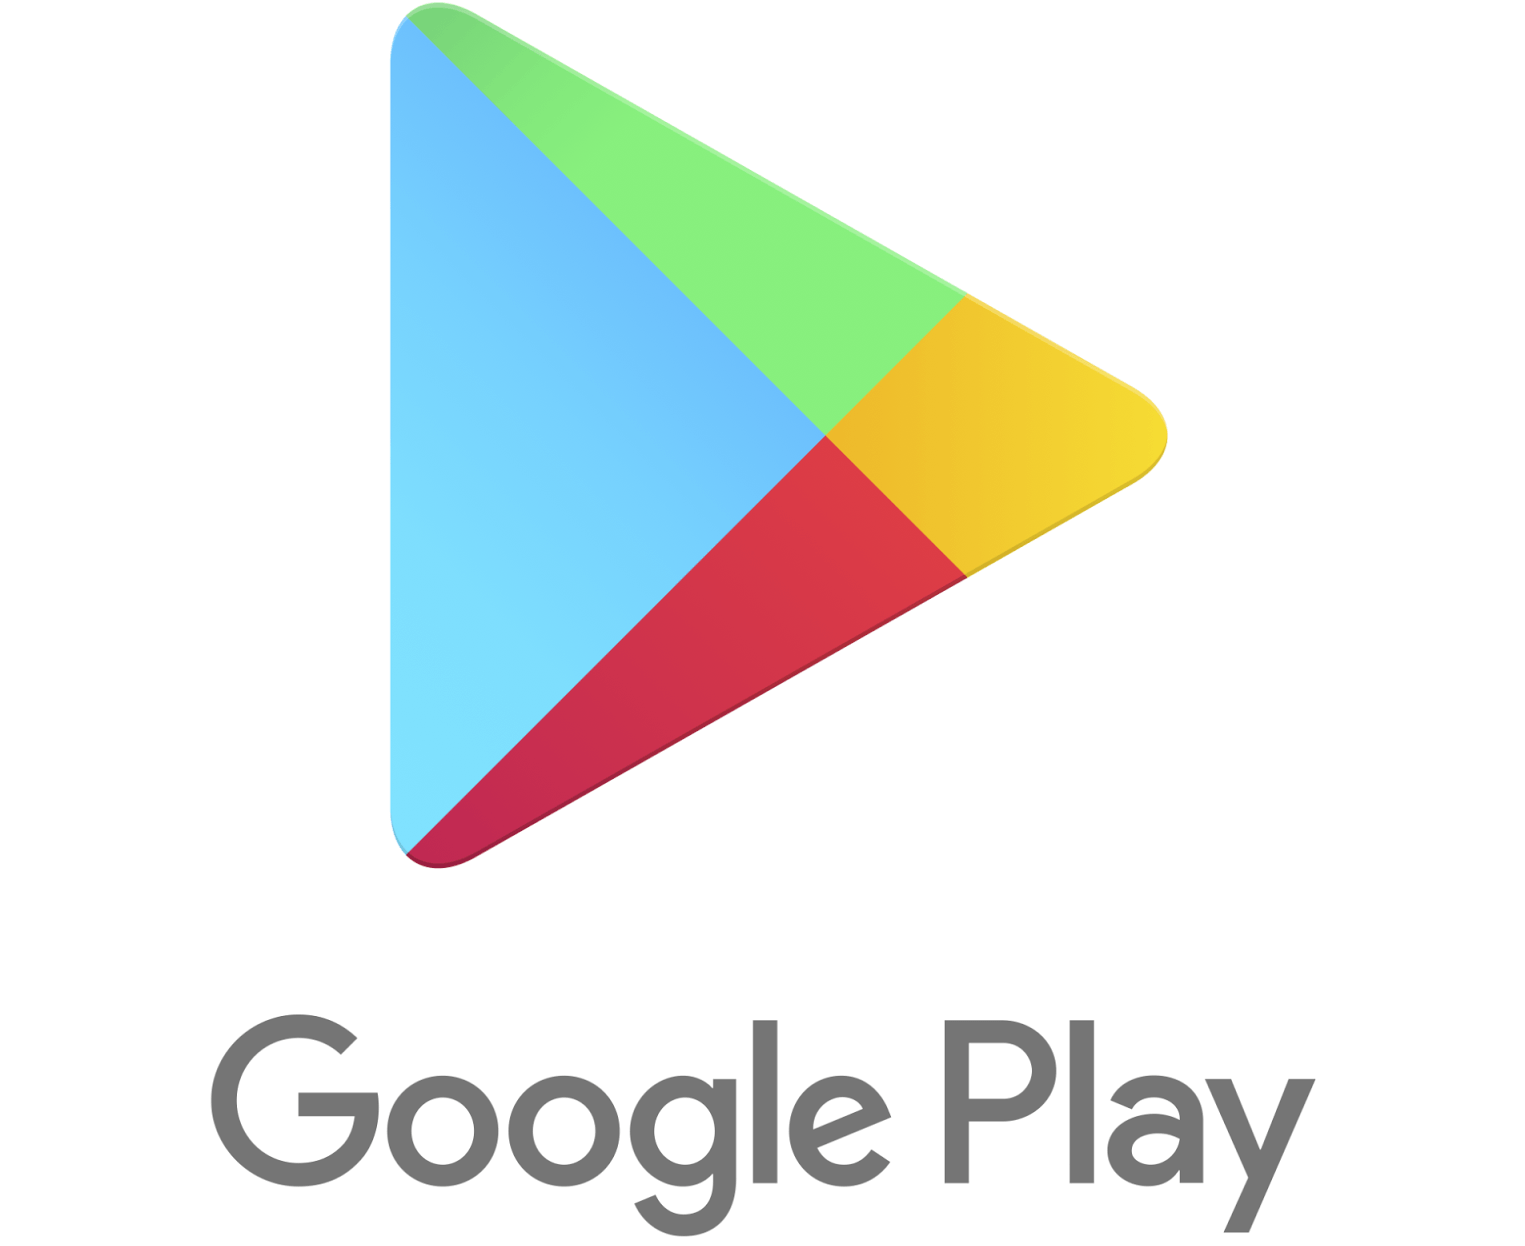 Google Now App Logo - How to update the Google Play app on your Android phone or tablet |